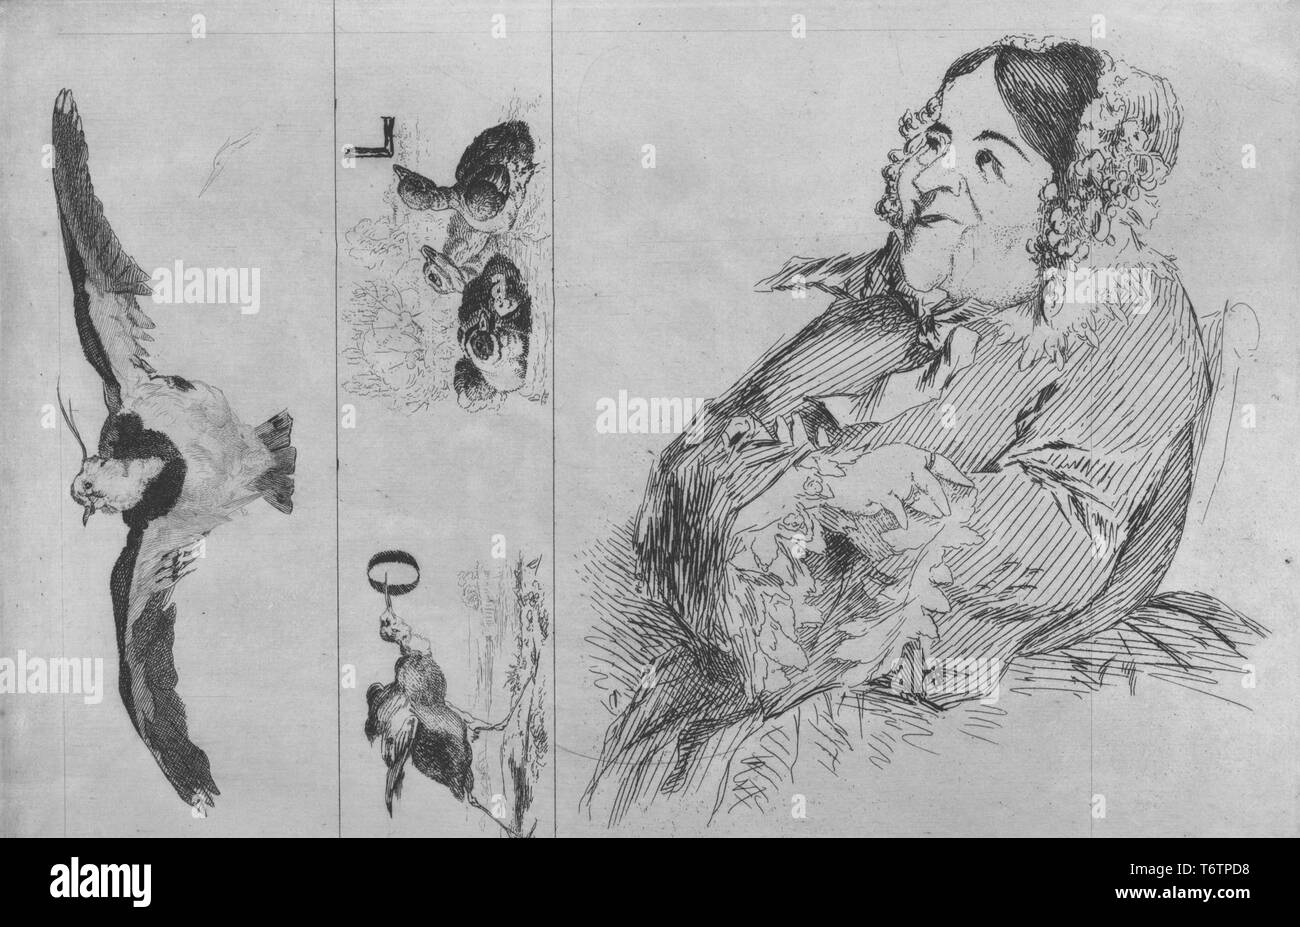 Black and white etching, in three vertical registers or columns; at left, a pheasant or peahen flies toward the viewer with outstretched wings; at center, a walking bird pokes its long beak through the letter 'O' and several duck chicks look toward the letter 'L'; at right, a large, mature woman, wearing a striped victorian dress and delicate bonnet, is depicted from the waist up, in three quarter profile view, looking toward the upper left corner of her register, with a pleased expression on her face; titled 'Essais d'eau-forte: charge d'une brosse dame agee..', 1867. (Etching Test: Taking on Stock Photo